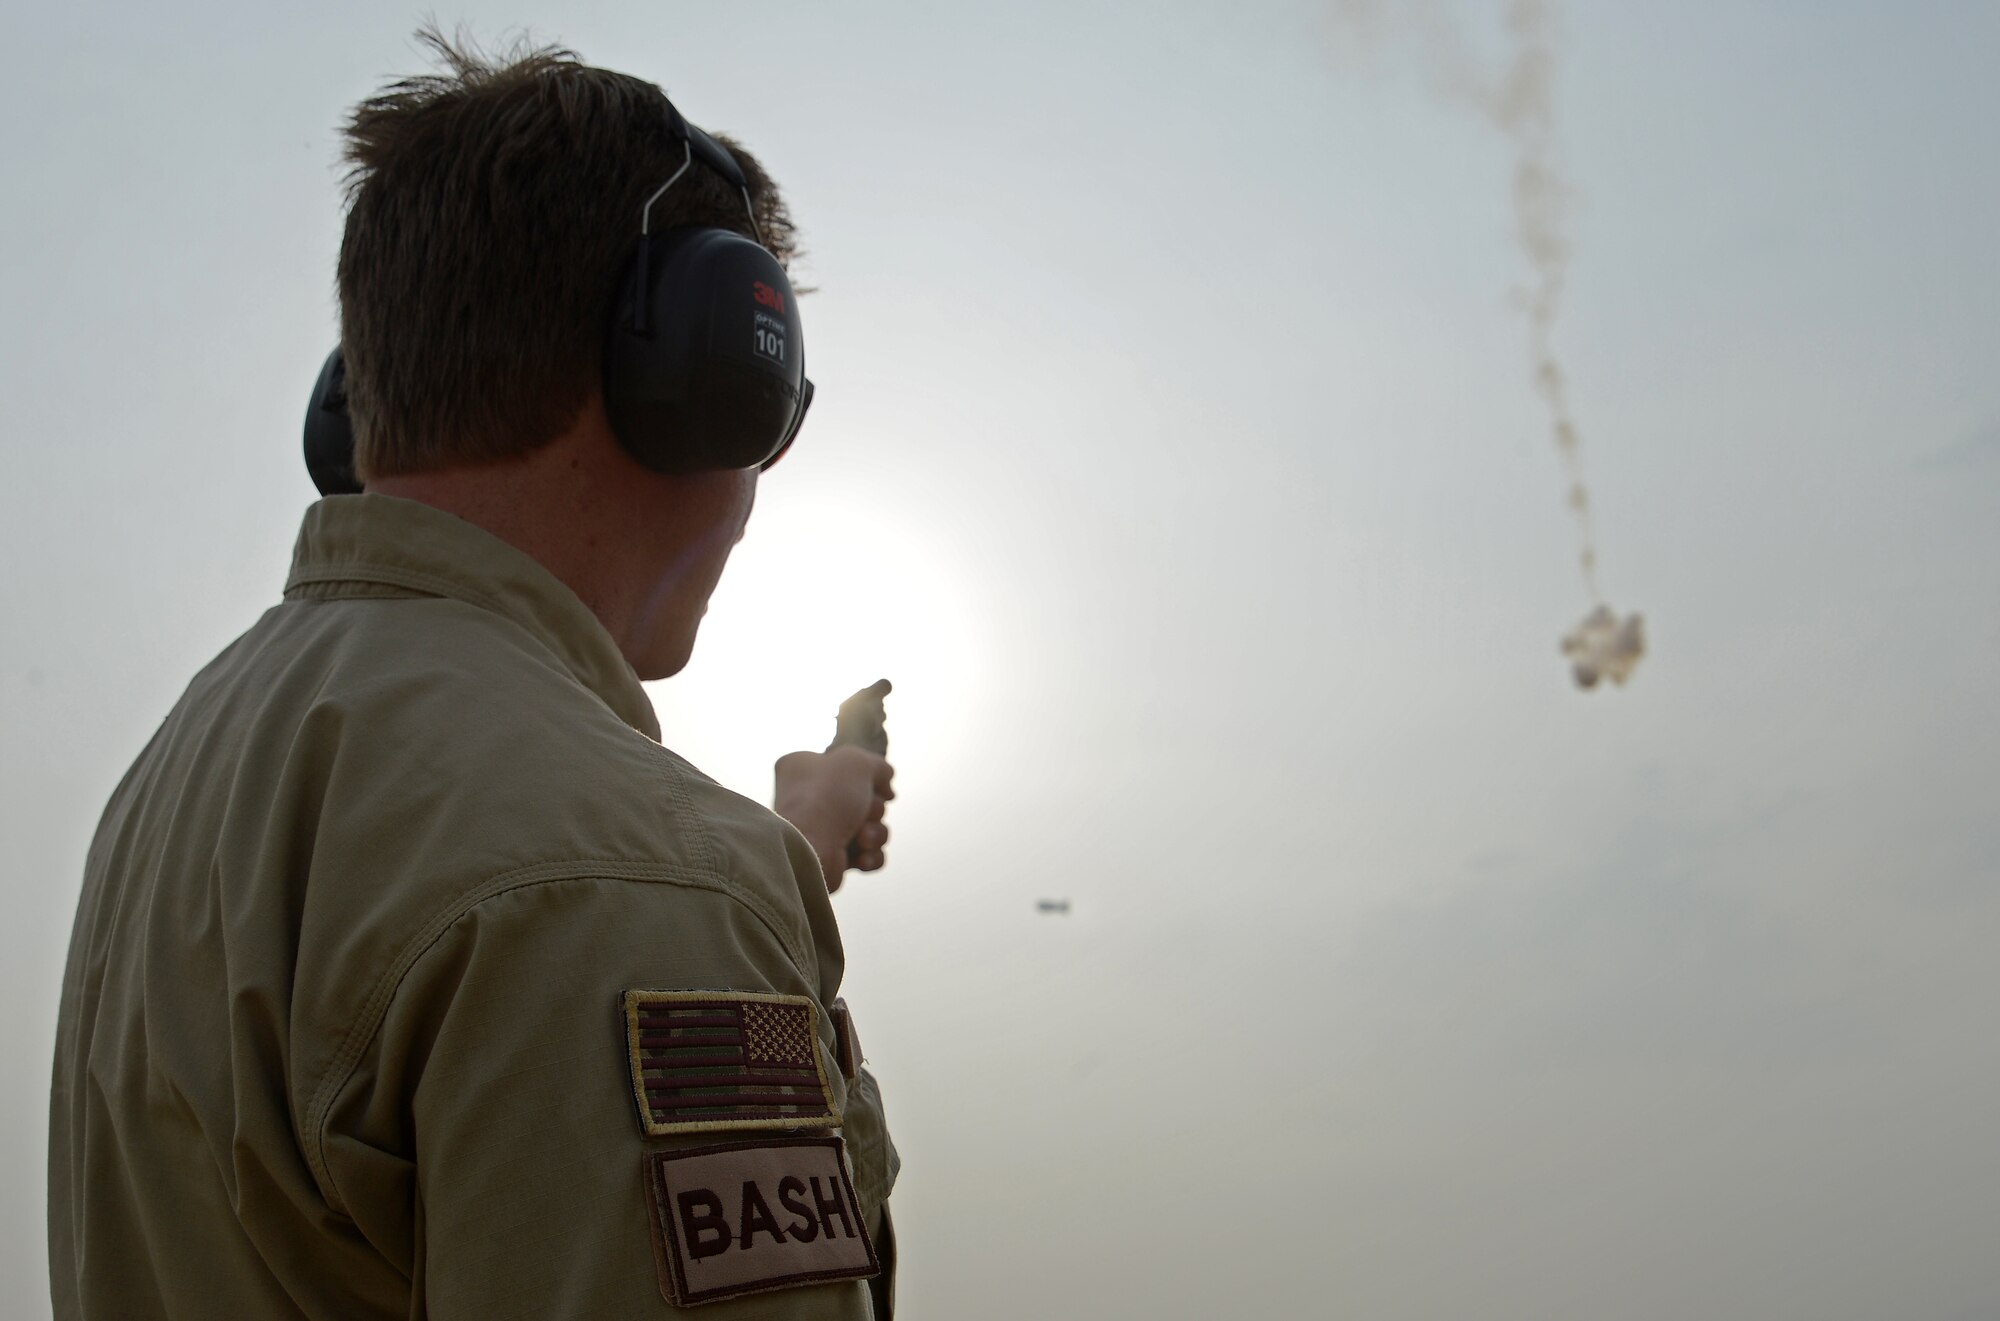 James Capps, 455th Air Expeditionary Wing U.S. Department of Agriculture (APHIS) and BASH forward operating base biologist, shoots off a pyrotechnic to harass a flock of Eurasian tree sparrows, Nov. 21, 2017 at Bagram Airfield, Afghanistan.